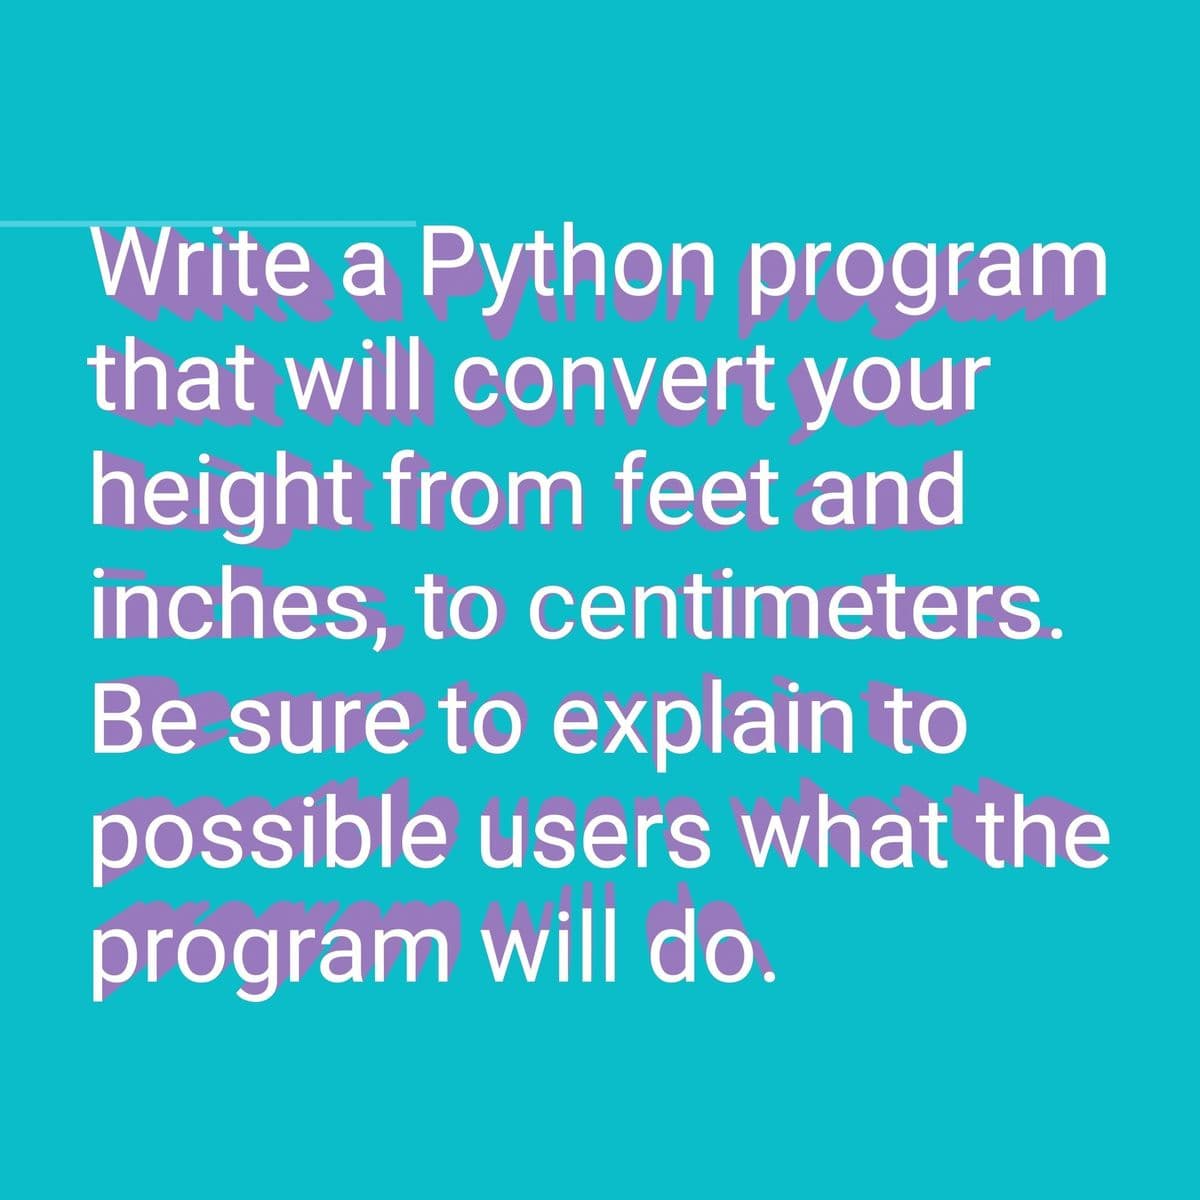 Write a Python program
that will convert your
height from feet and
inches, to centimeters.
Be sure to explain to
possible users what the
program will do.